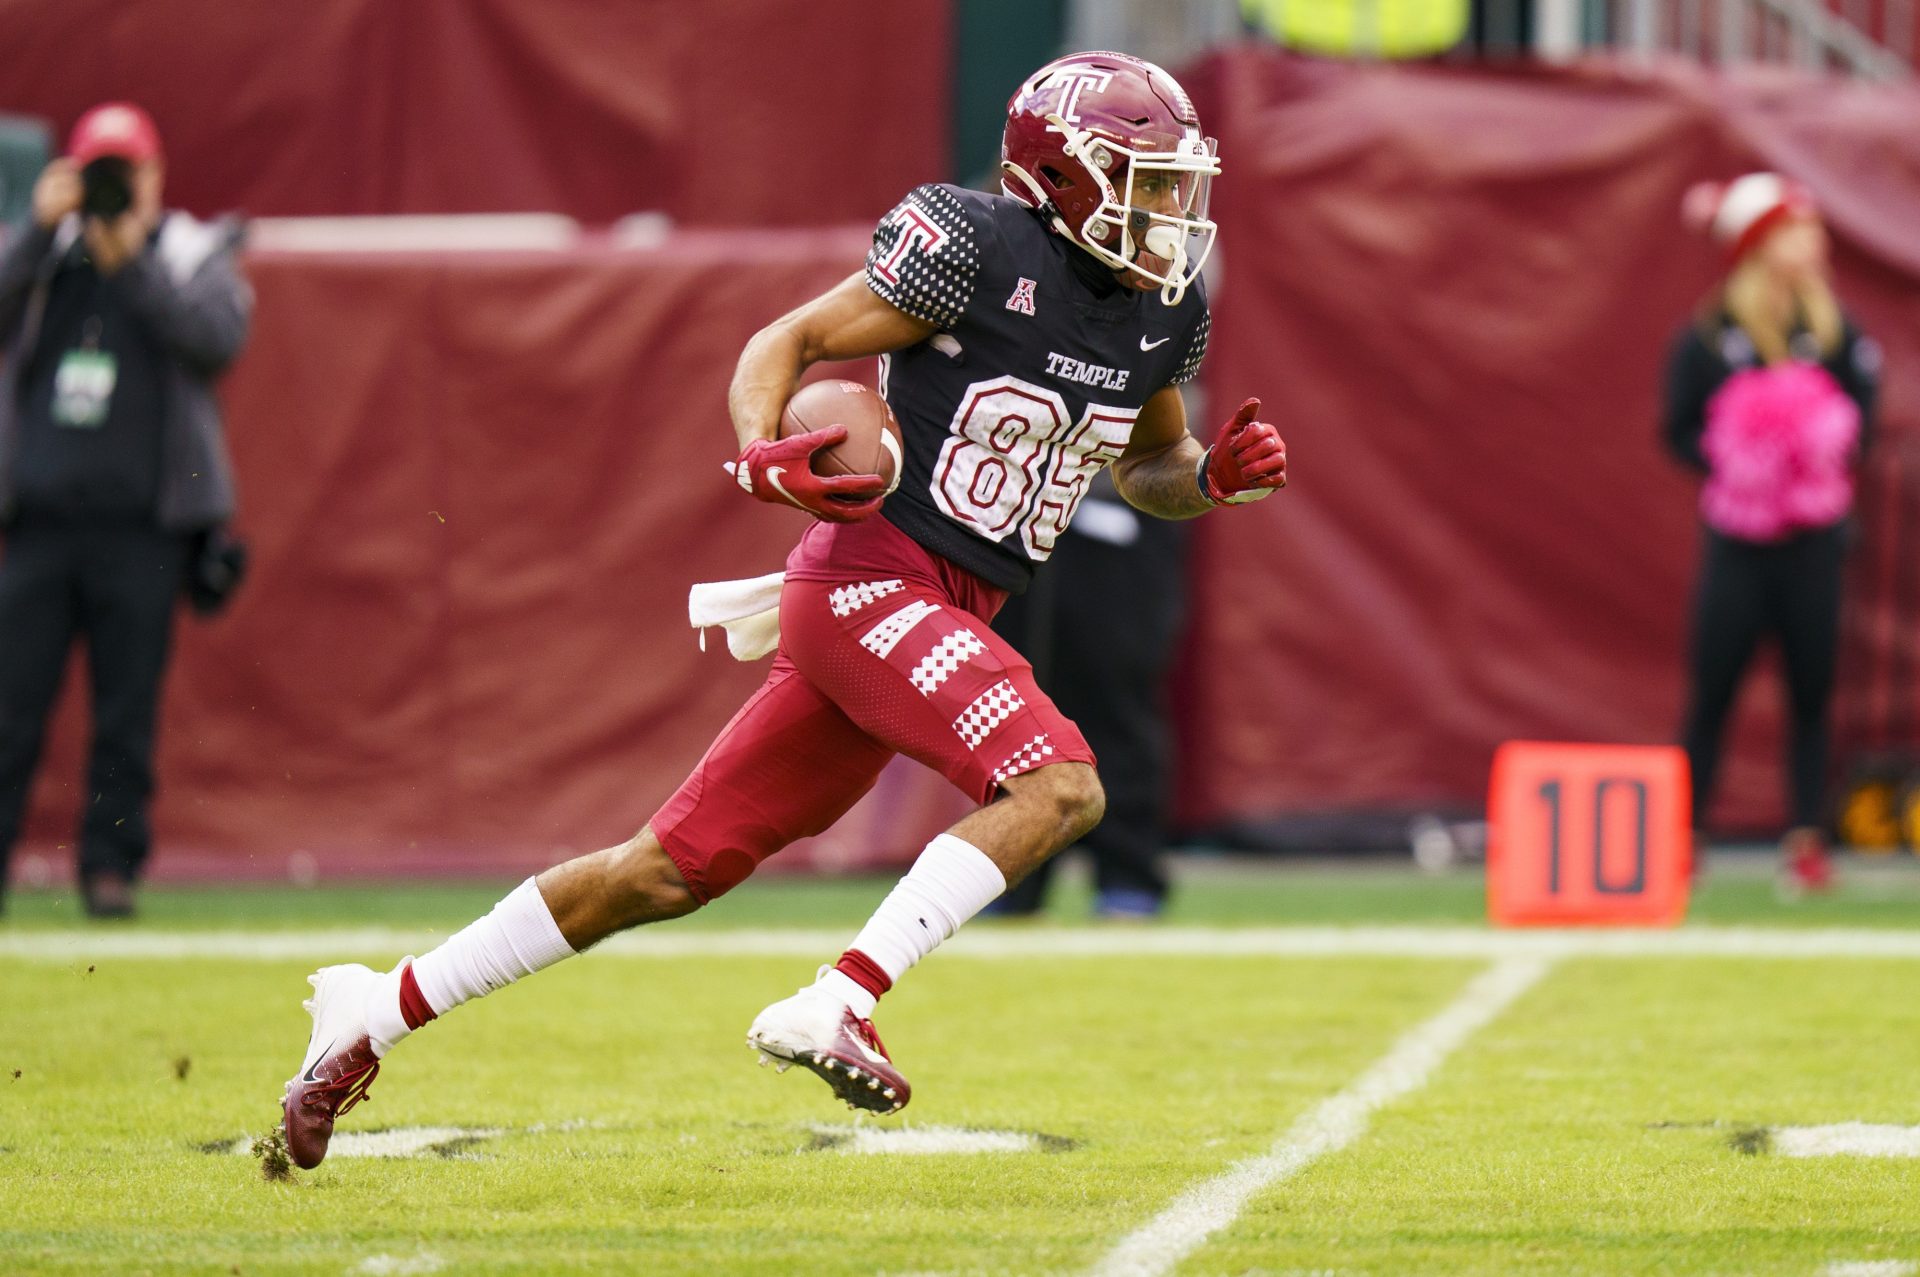 Temple wide receiver Amad Anderson Jr. (85) returns the kick during the second half of an NCAA college football against Houston, Saturday, Nov. 13, 2021, in Philadelphia. Houston won 37-8.